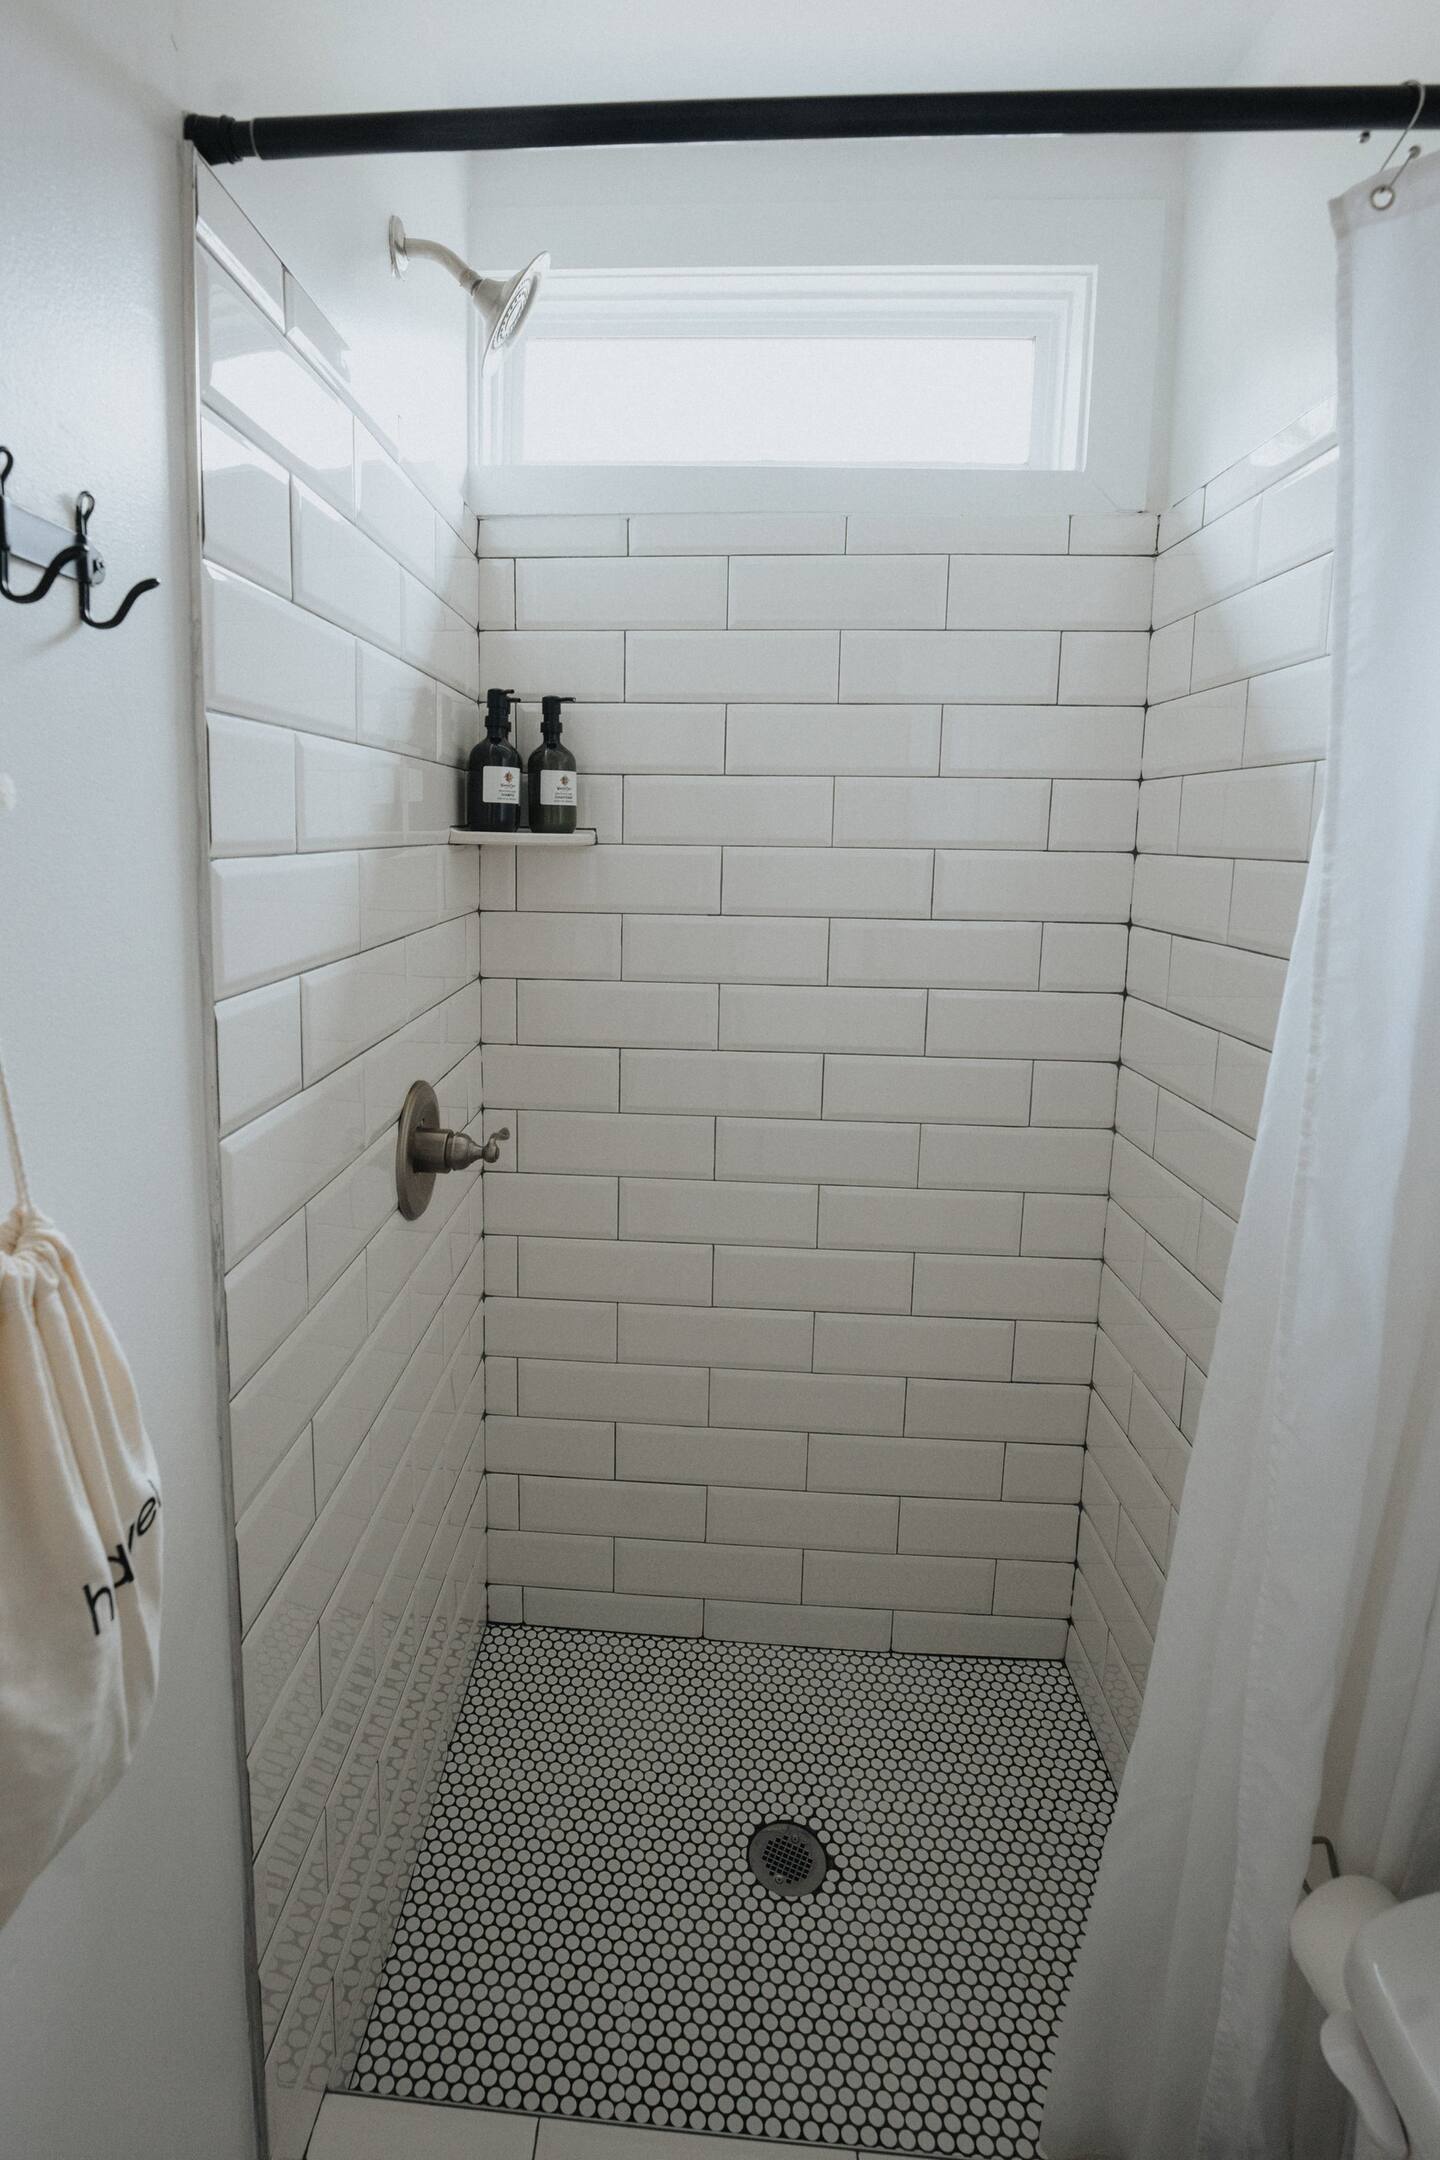 Shiny shower with black and white tiles on the floor and white shower curtain